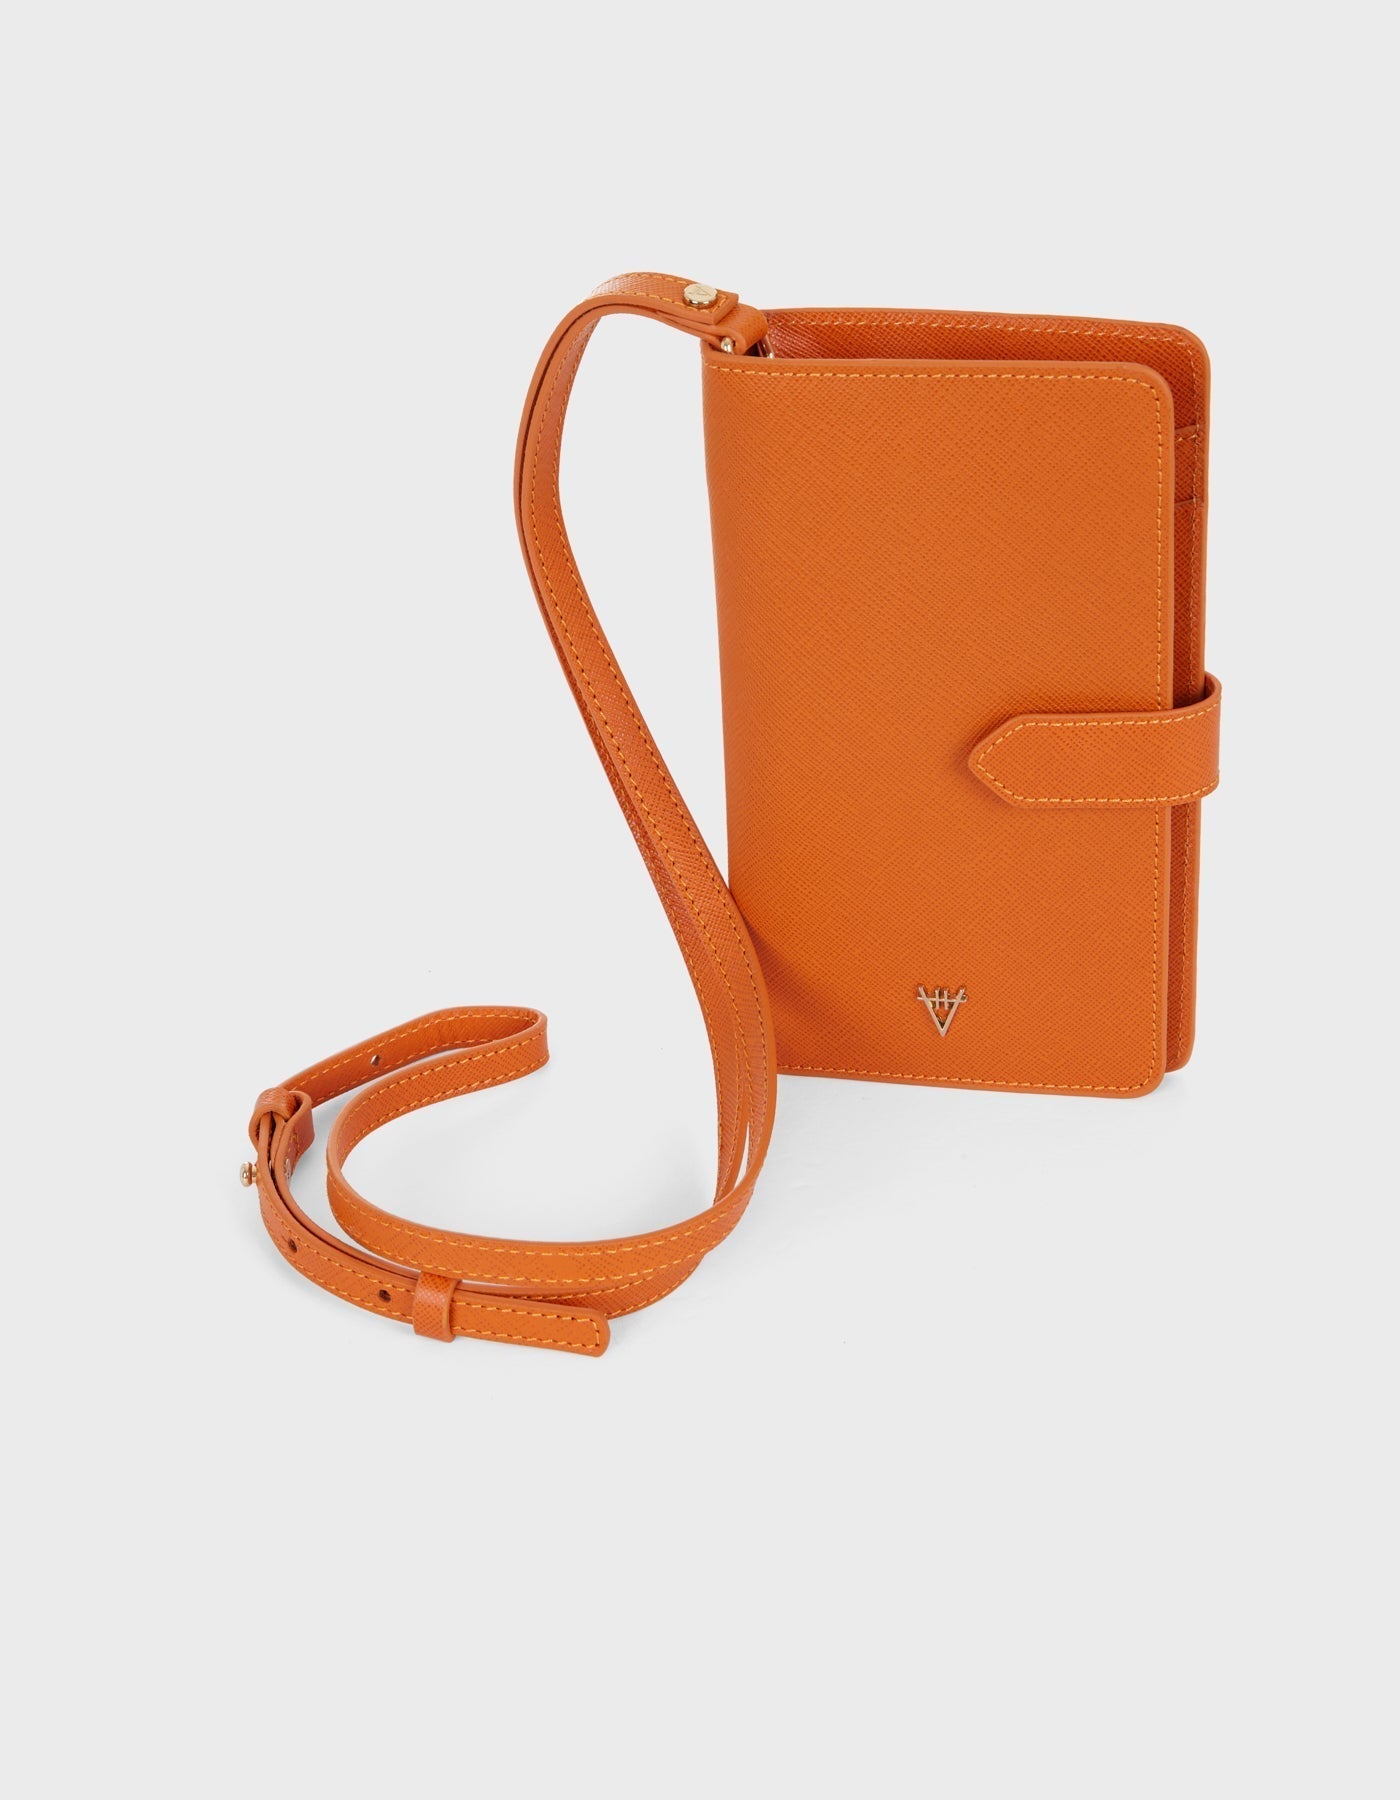 Ita Crossbody Bag and Wallet - Finest Quality HiVa Atelier GmbH Leather Accessories